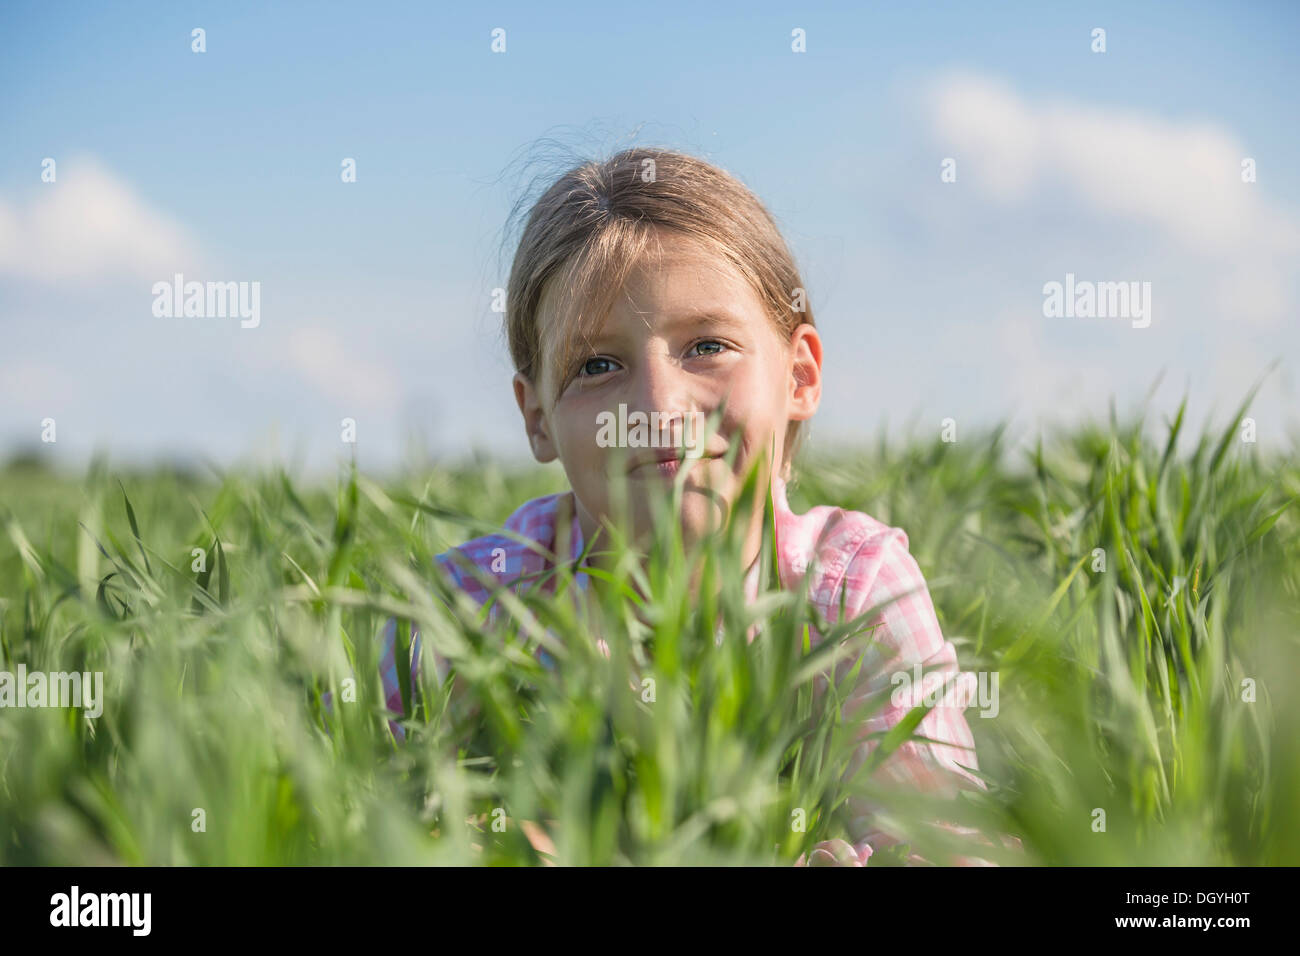 A young smiling girl lying in the grass on a summer's day Stock Photo